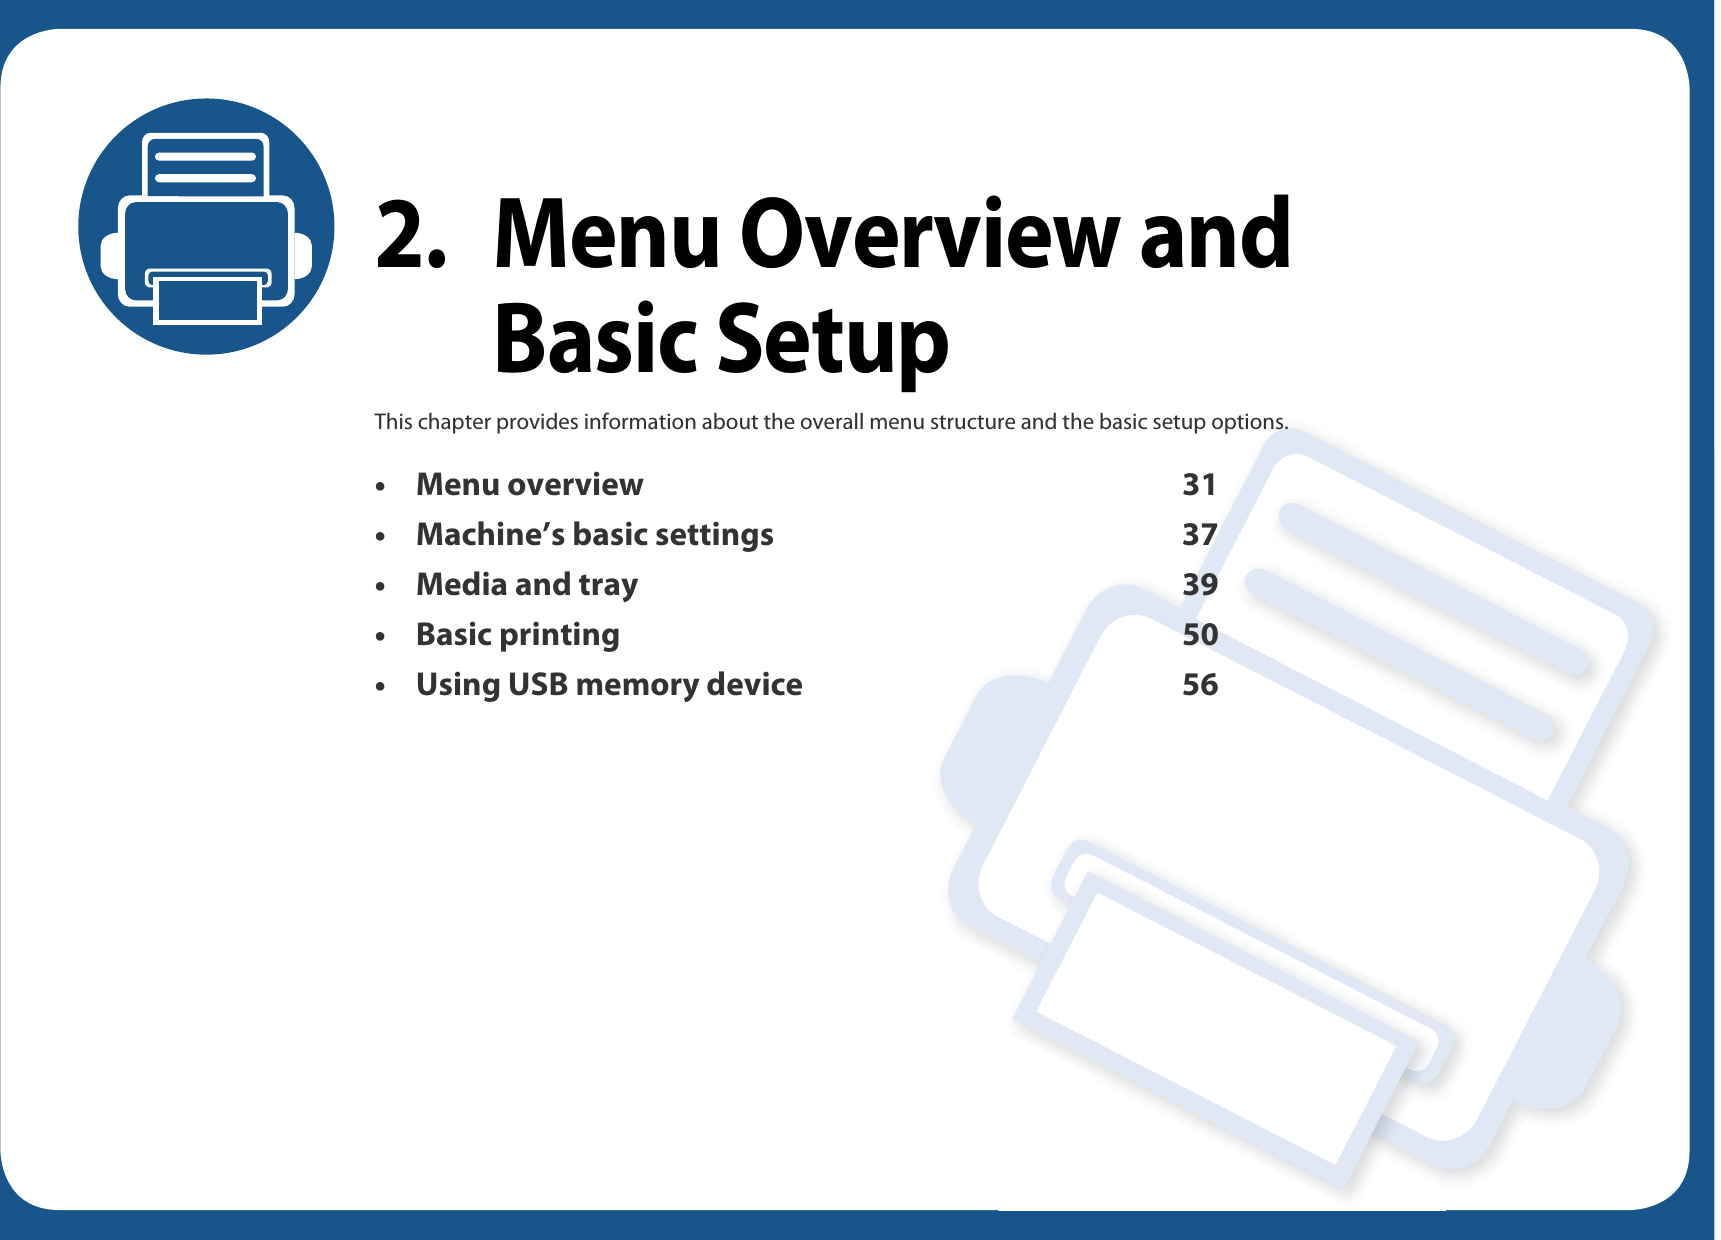 2. Menu Overview and Basic SetupThis chapter provides information about the overall menu structure and the basic setup options.• Menu overview 31• Machine’s basic settings 37• Media and tray 39• Basic printing 50• Using USB memory device 56